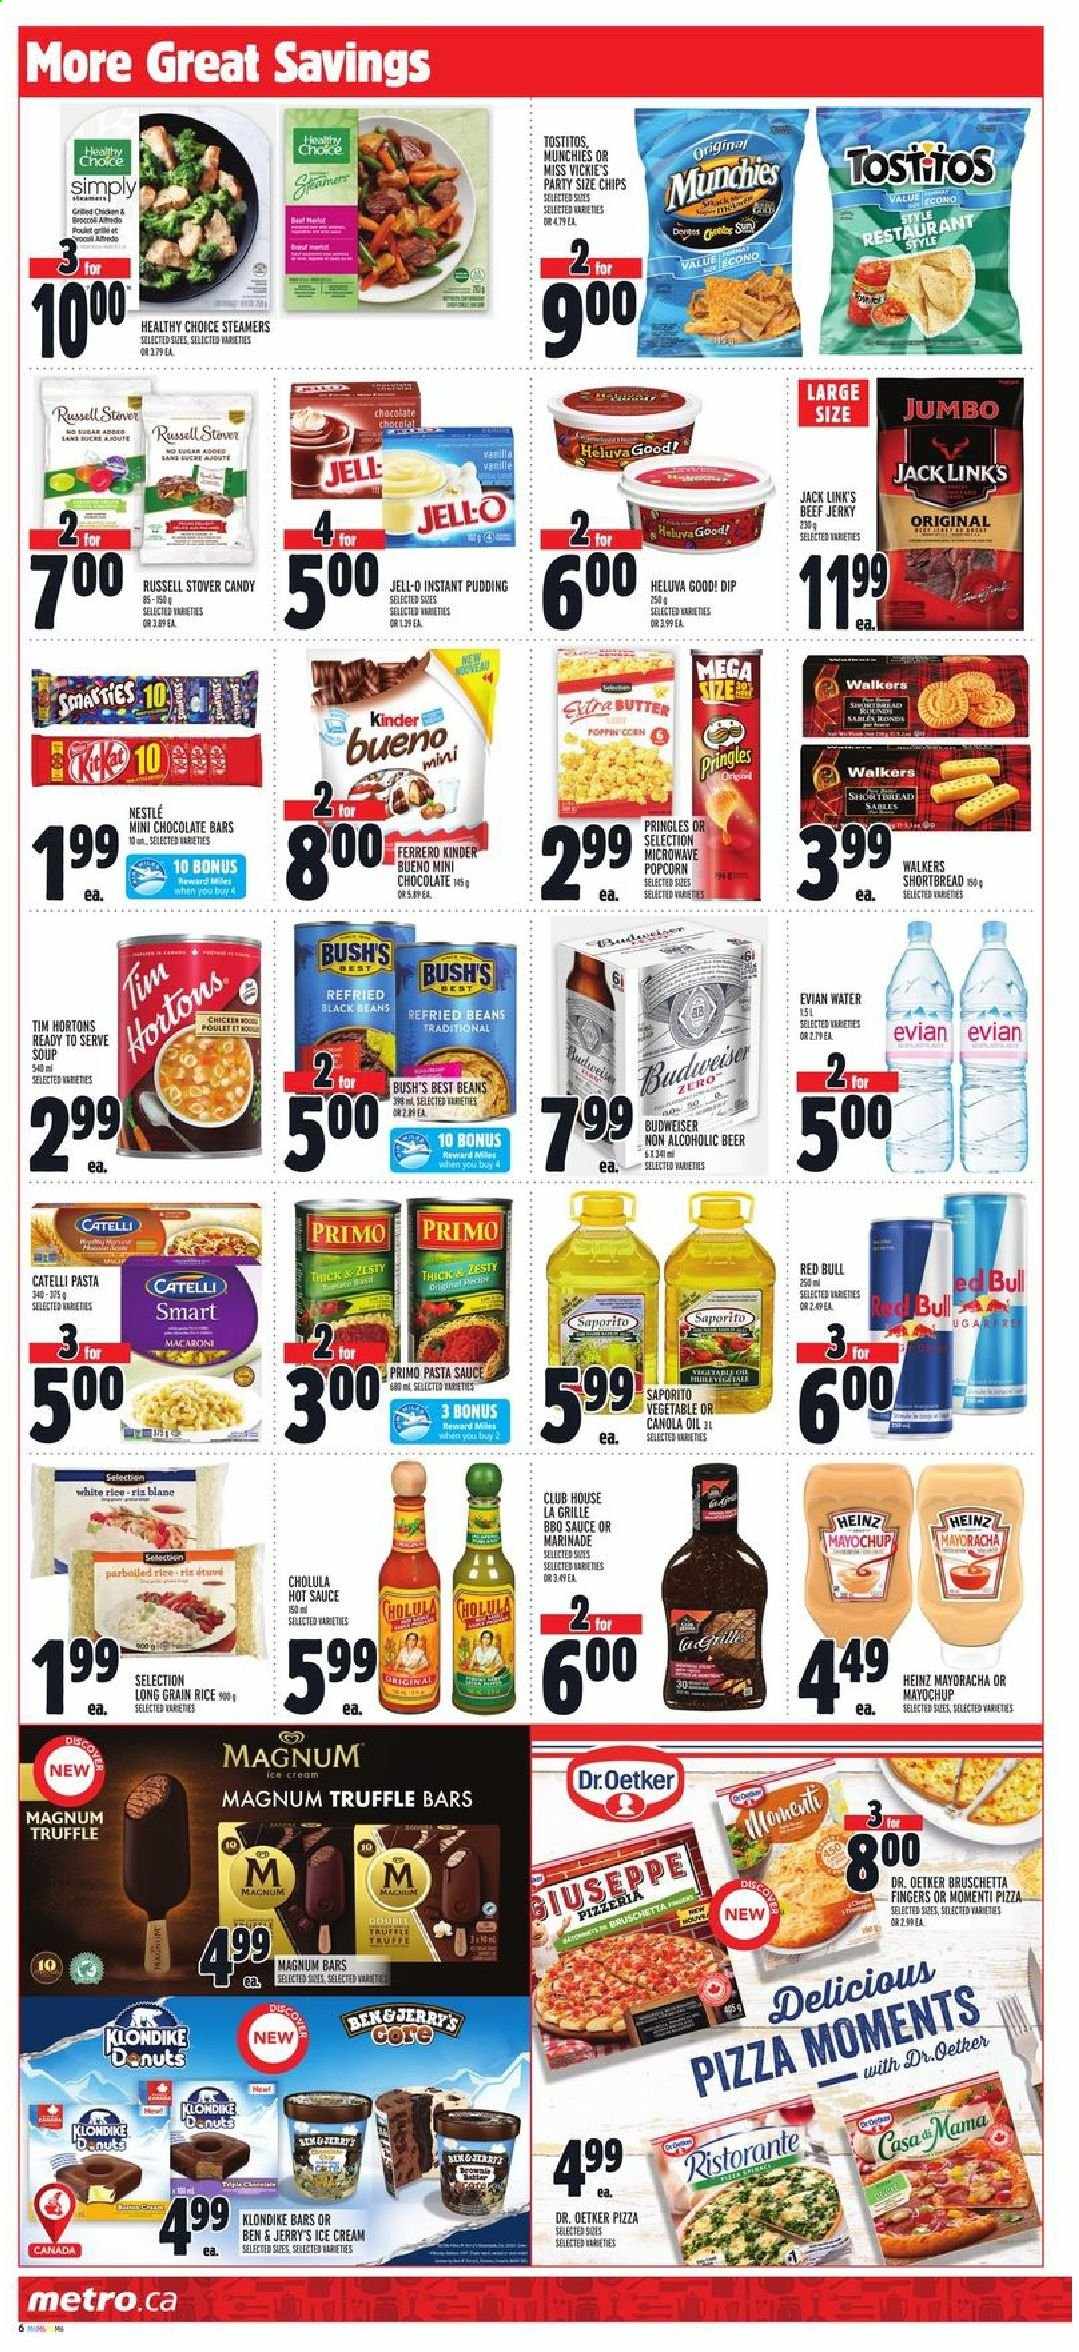 thumbnail - Metro Flyer - April 15, 2021 - April 21, 2021 - Sales products - beans, pizza, pasta sauce, macaroni, soup, Healthy Choice, bruschetta, beef jerky, jerky, Dr. Oetker, pudding, butter, dip, Magnum, ice cream, Ben & Jerry's, truffles, Kinder Bueno, chocolate bar, Pringles, popcorn, Tostitos, Jack Link's, Jell-O, black beans, refried beans, Heinz, rice, long grain rice, hot sauce, marinade, canola oil, oil, Red Bull, Evian, beer, Moments, Nestlé, chips. Page 7.